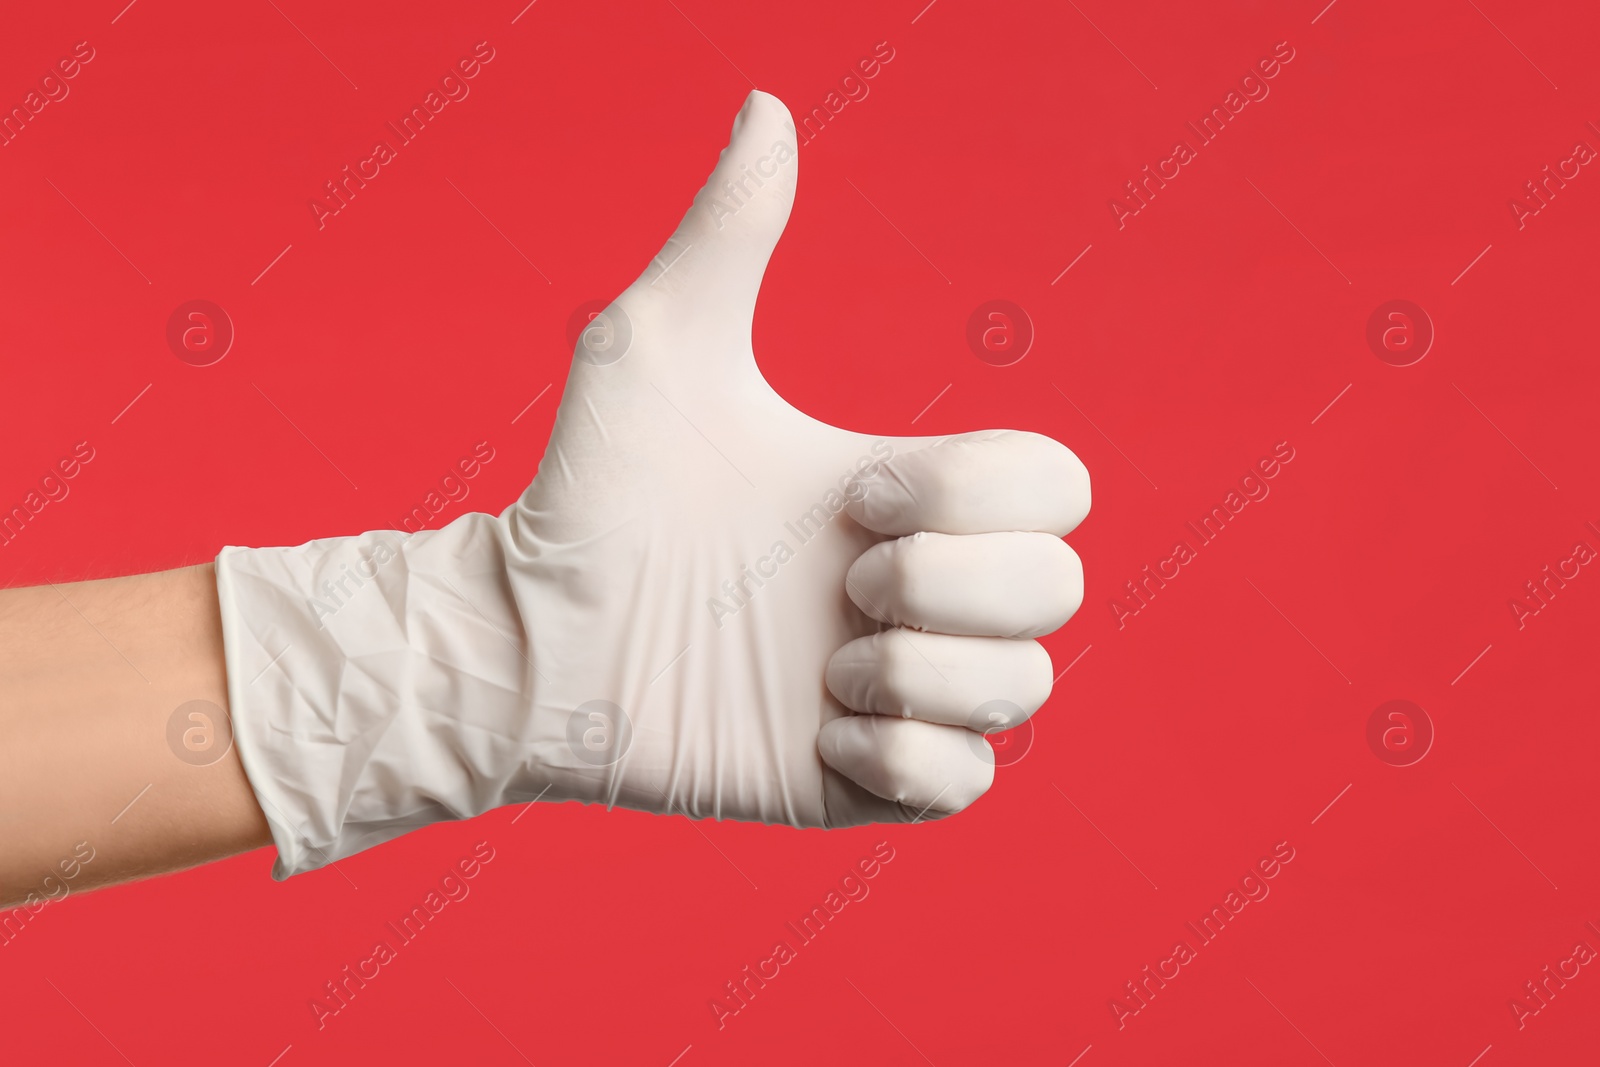 Photo of Person in medical gloves showing thumb up on red background, closeup of hand